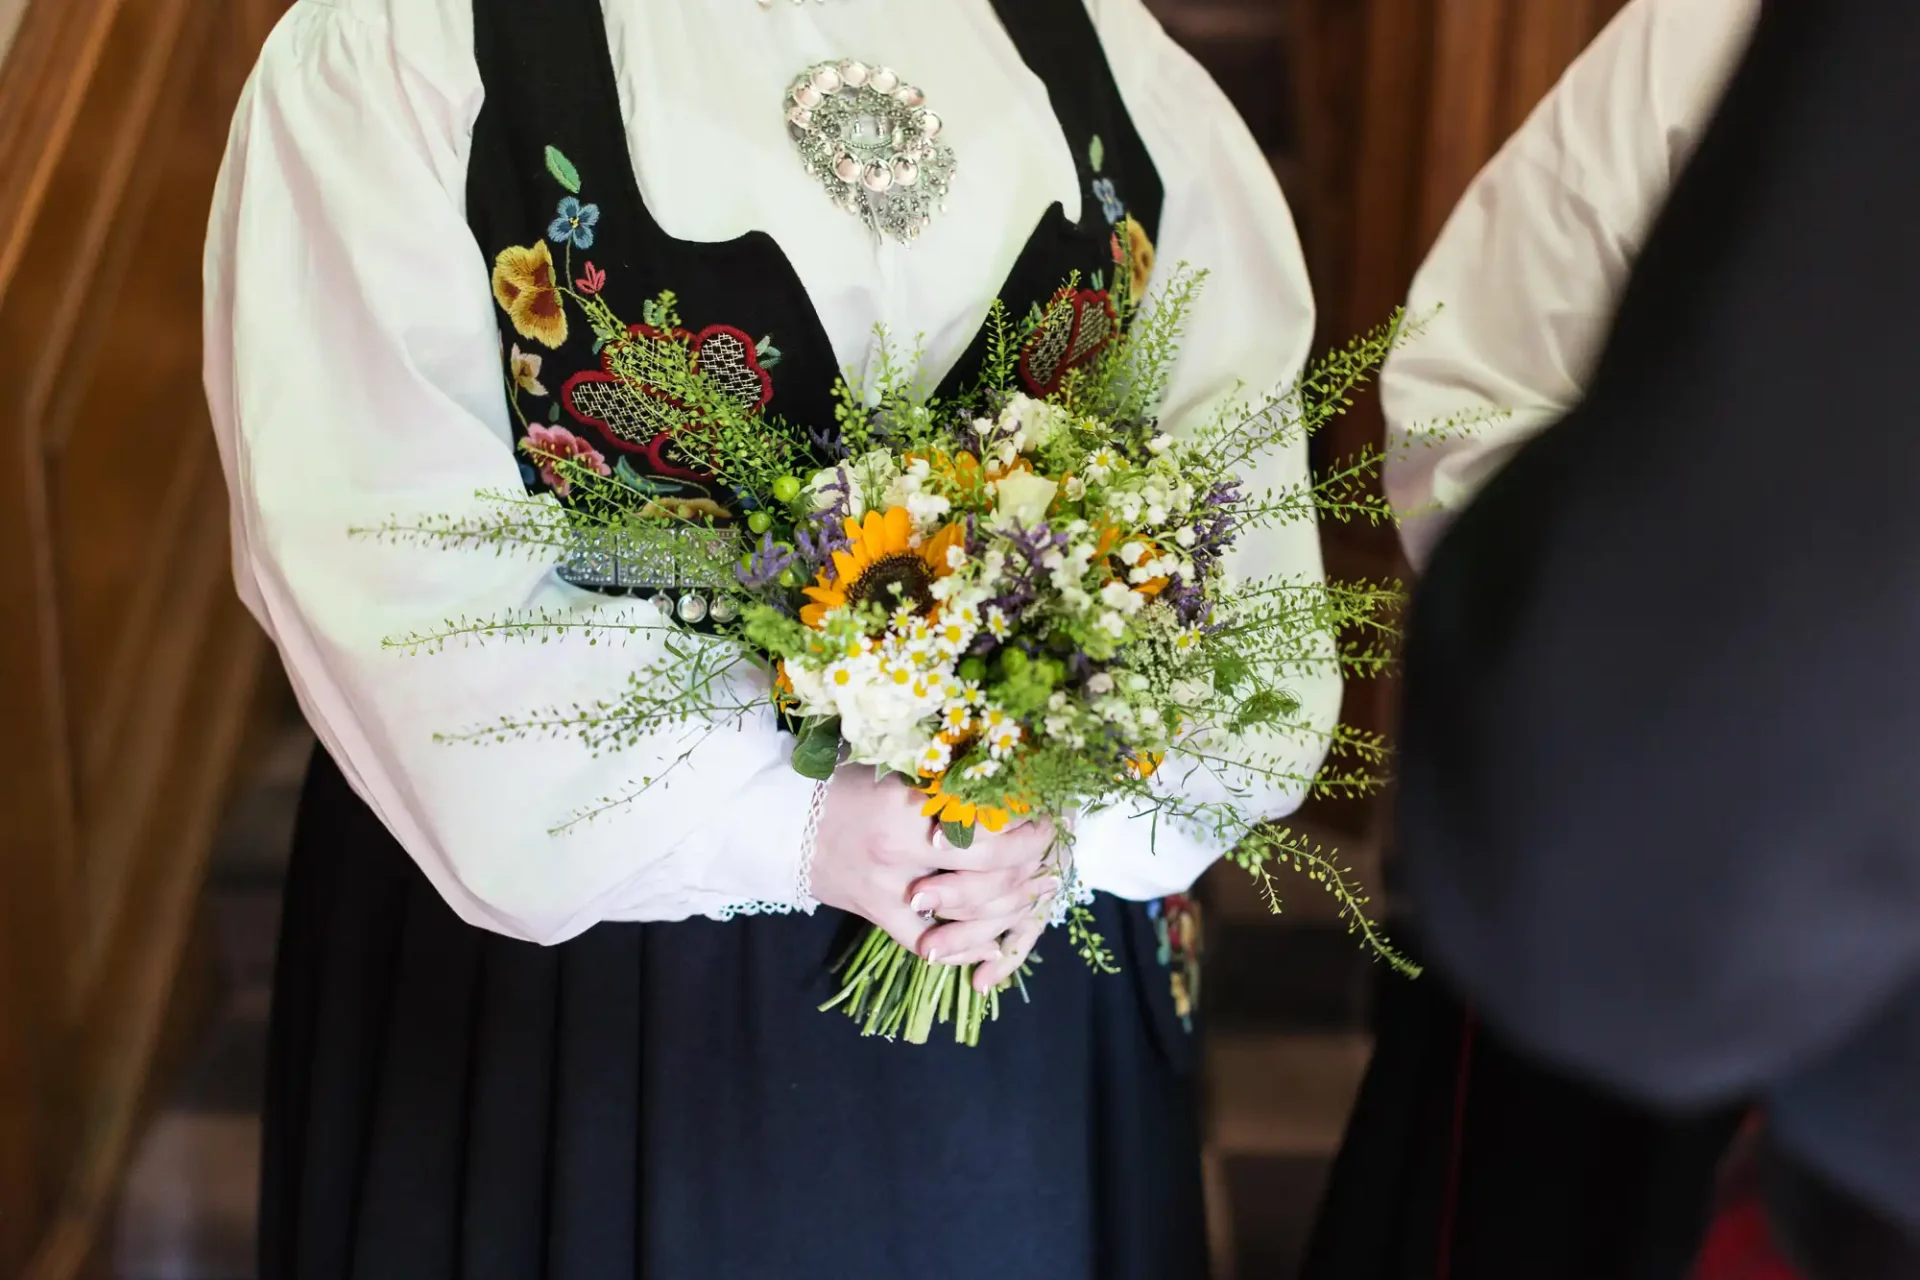 A person in traditional dress holding a bouquet of wildflowers, focusing on the hands and flowers, with another person partly visible.